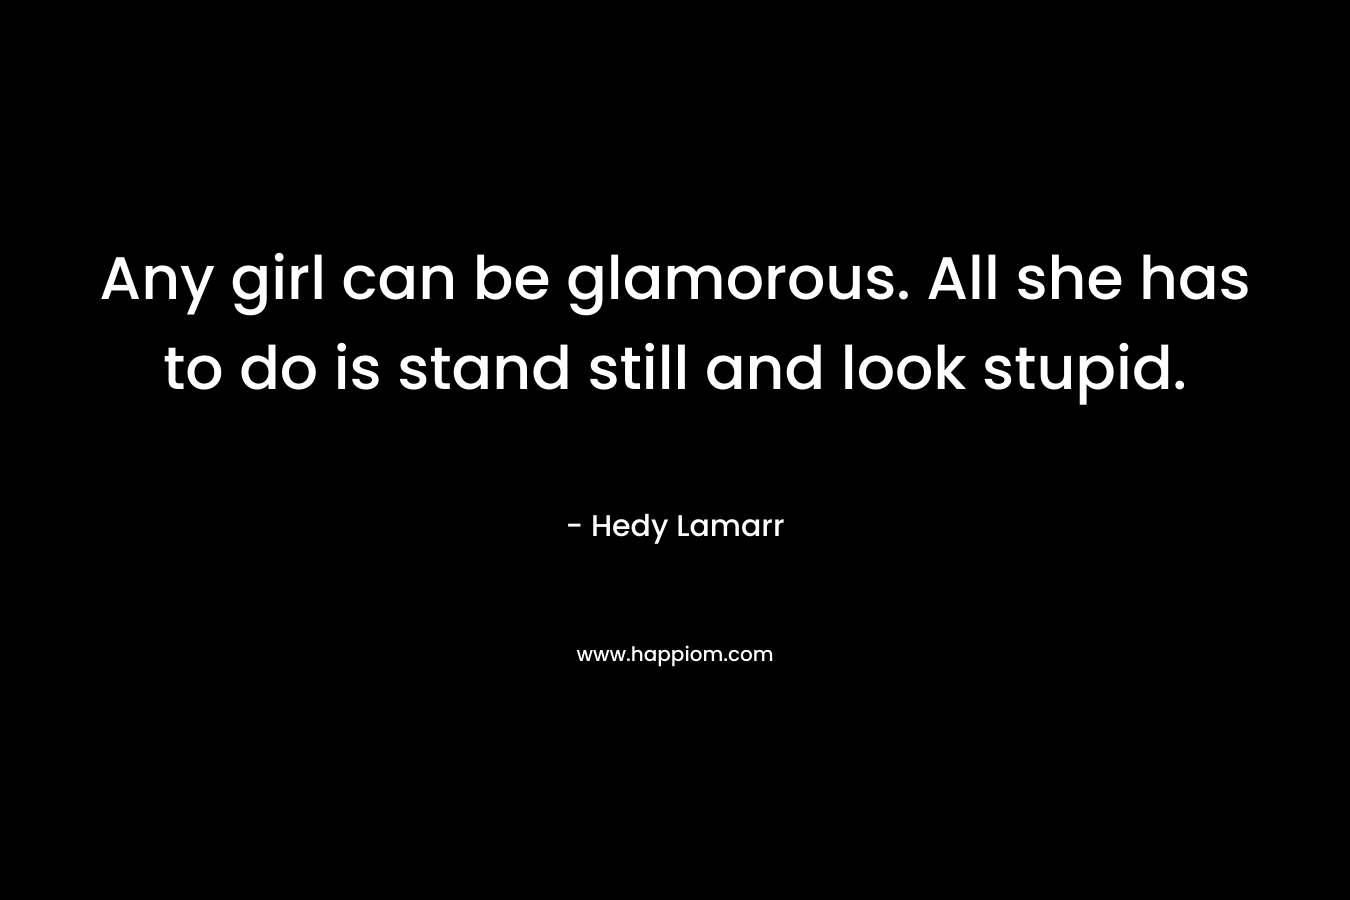 Any girl can be glamorous. All she has to do is stand still and look stupid. – Hedy Lamarr